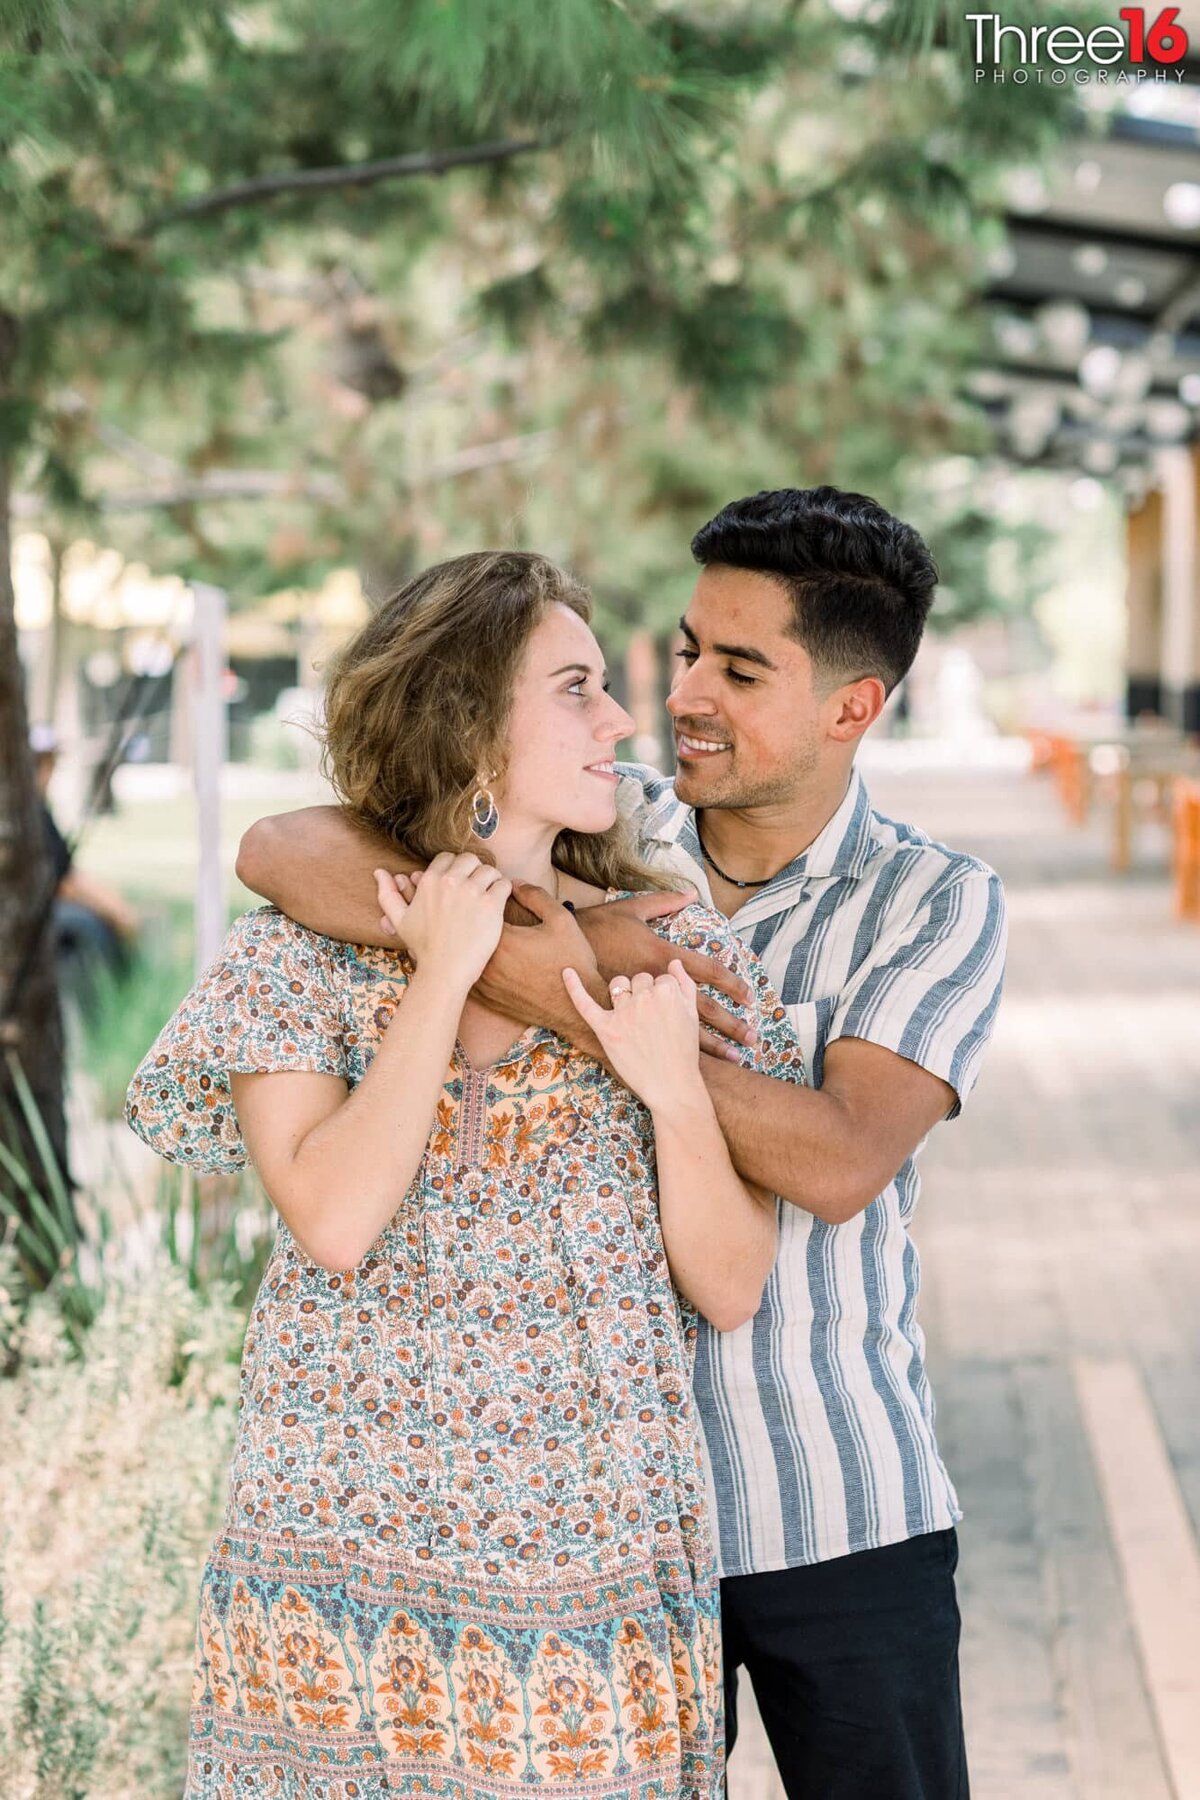 Anaheim Packing District Engagement Photography Orange County 7